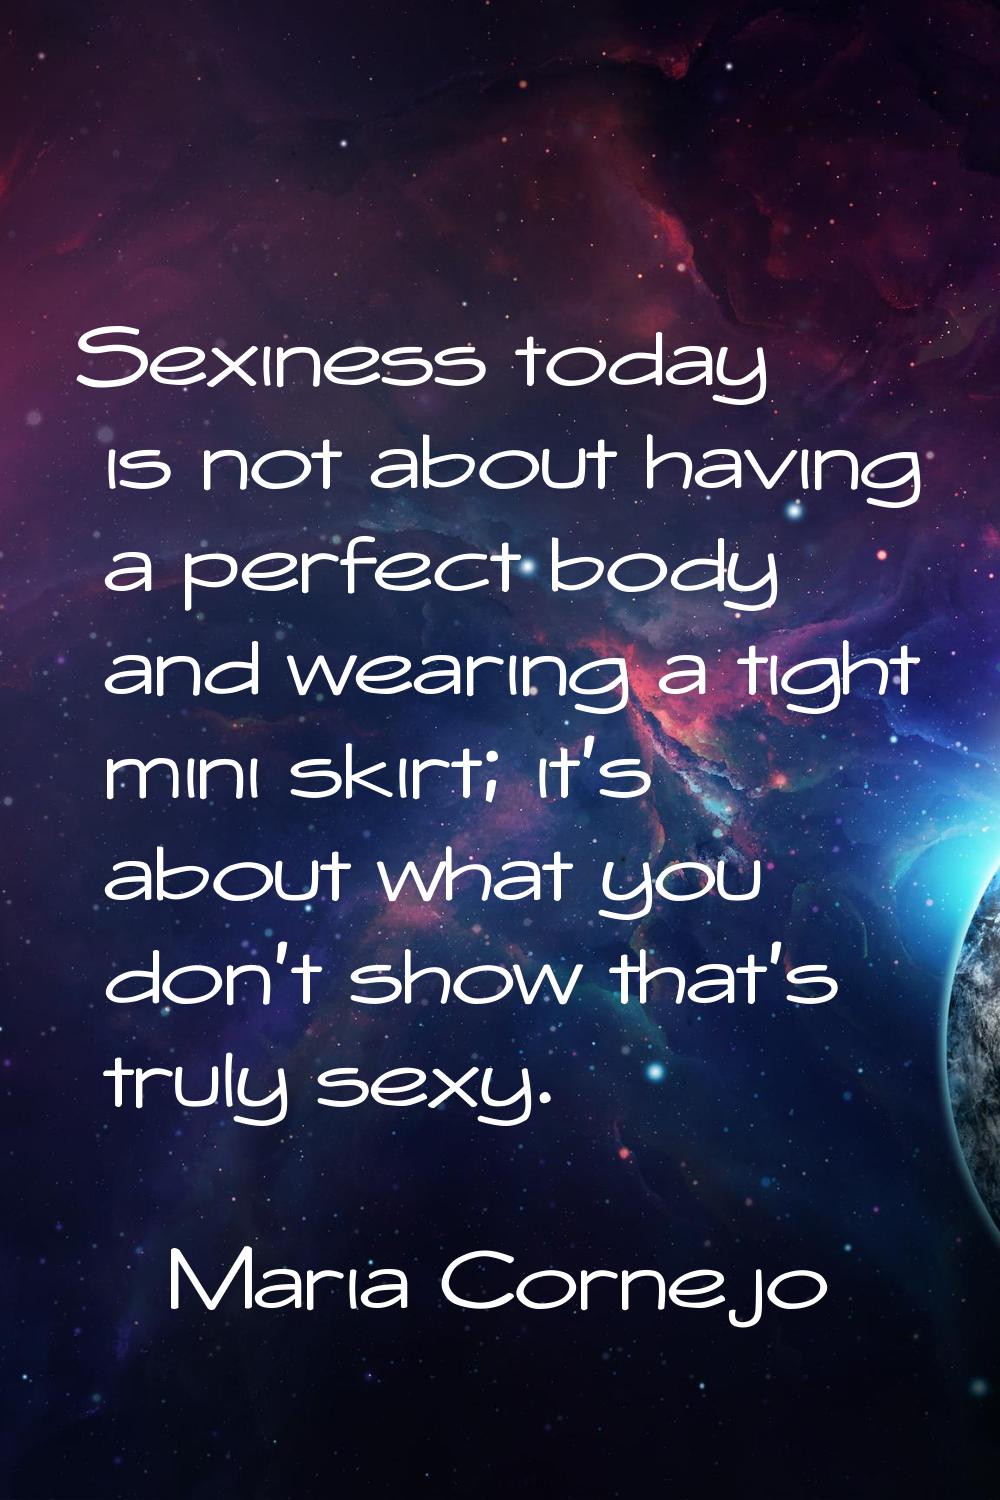 Sexiness today is not about having a perfect body and wearing a tight mini skirt; it's about what y